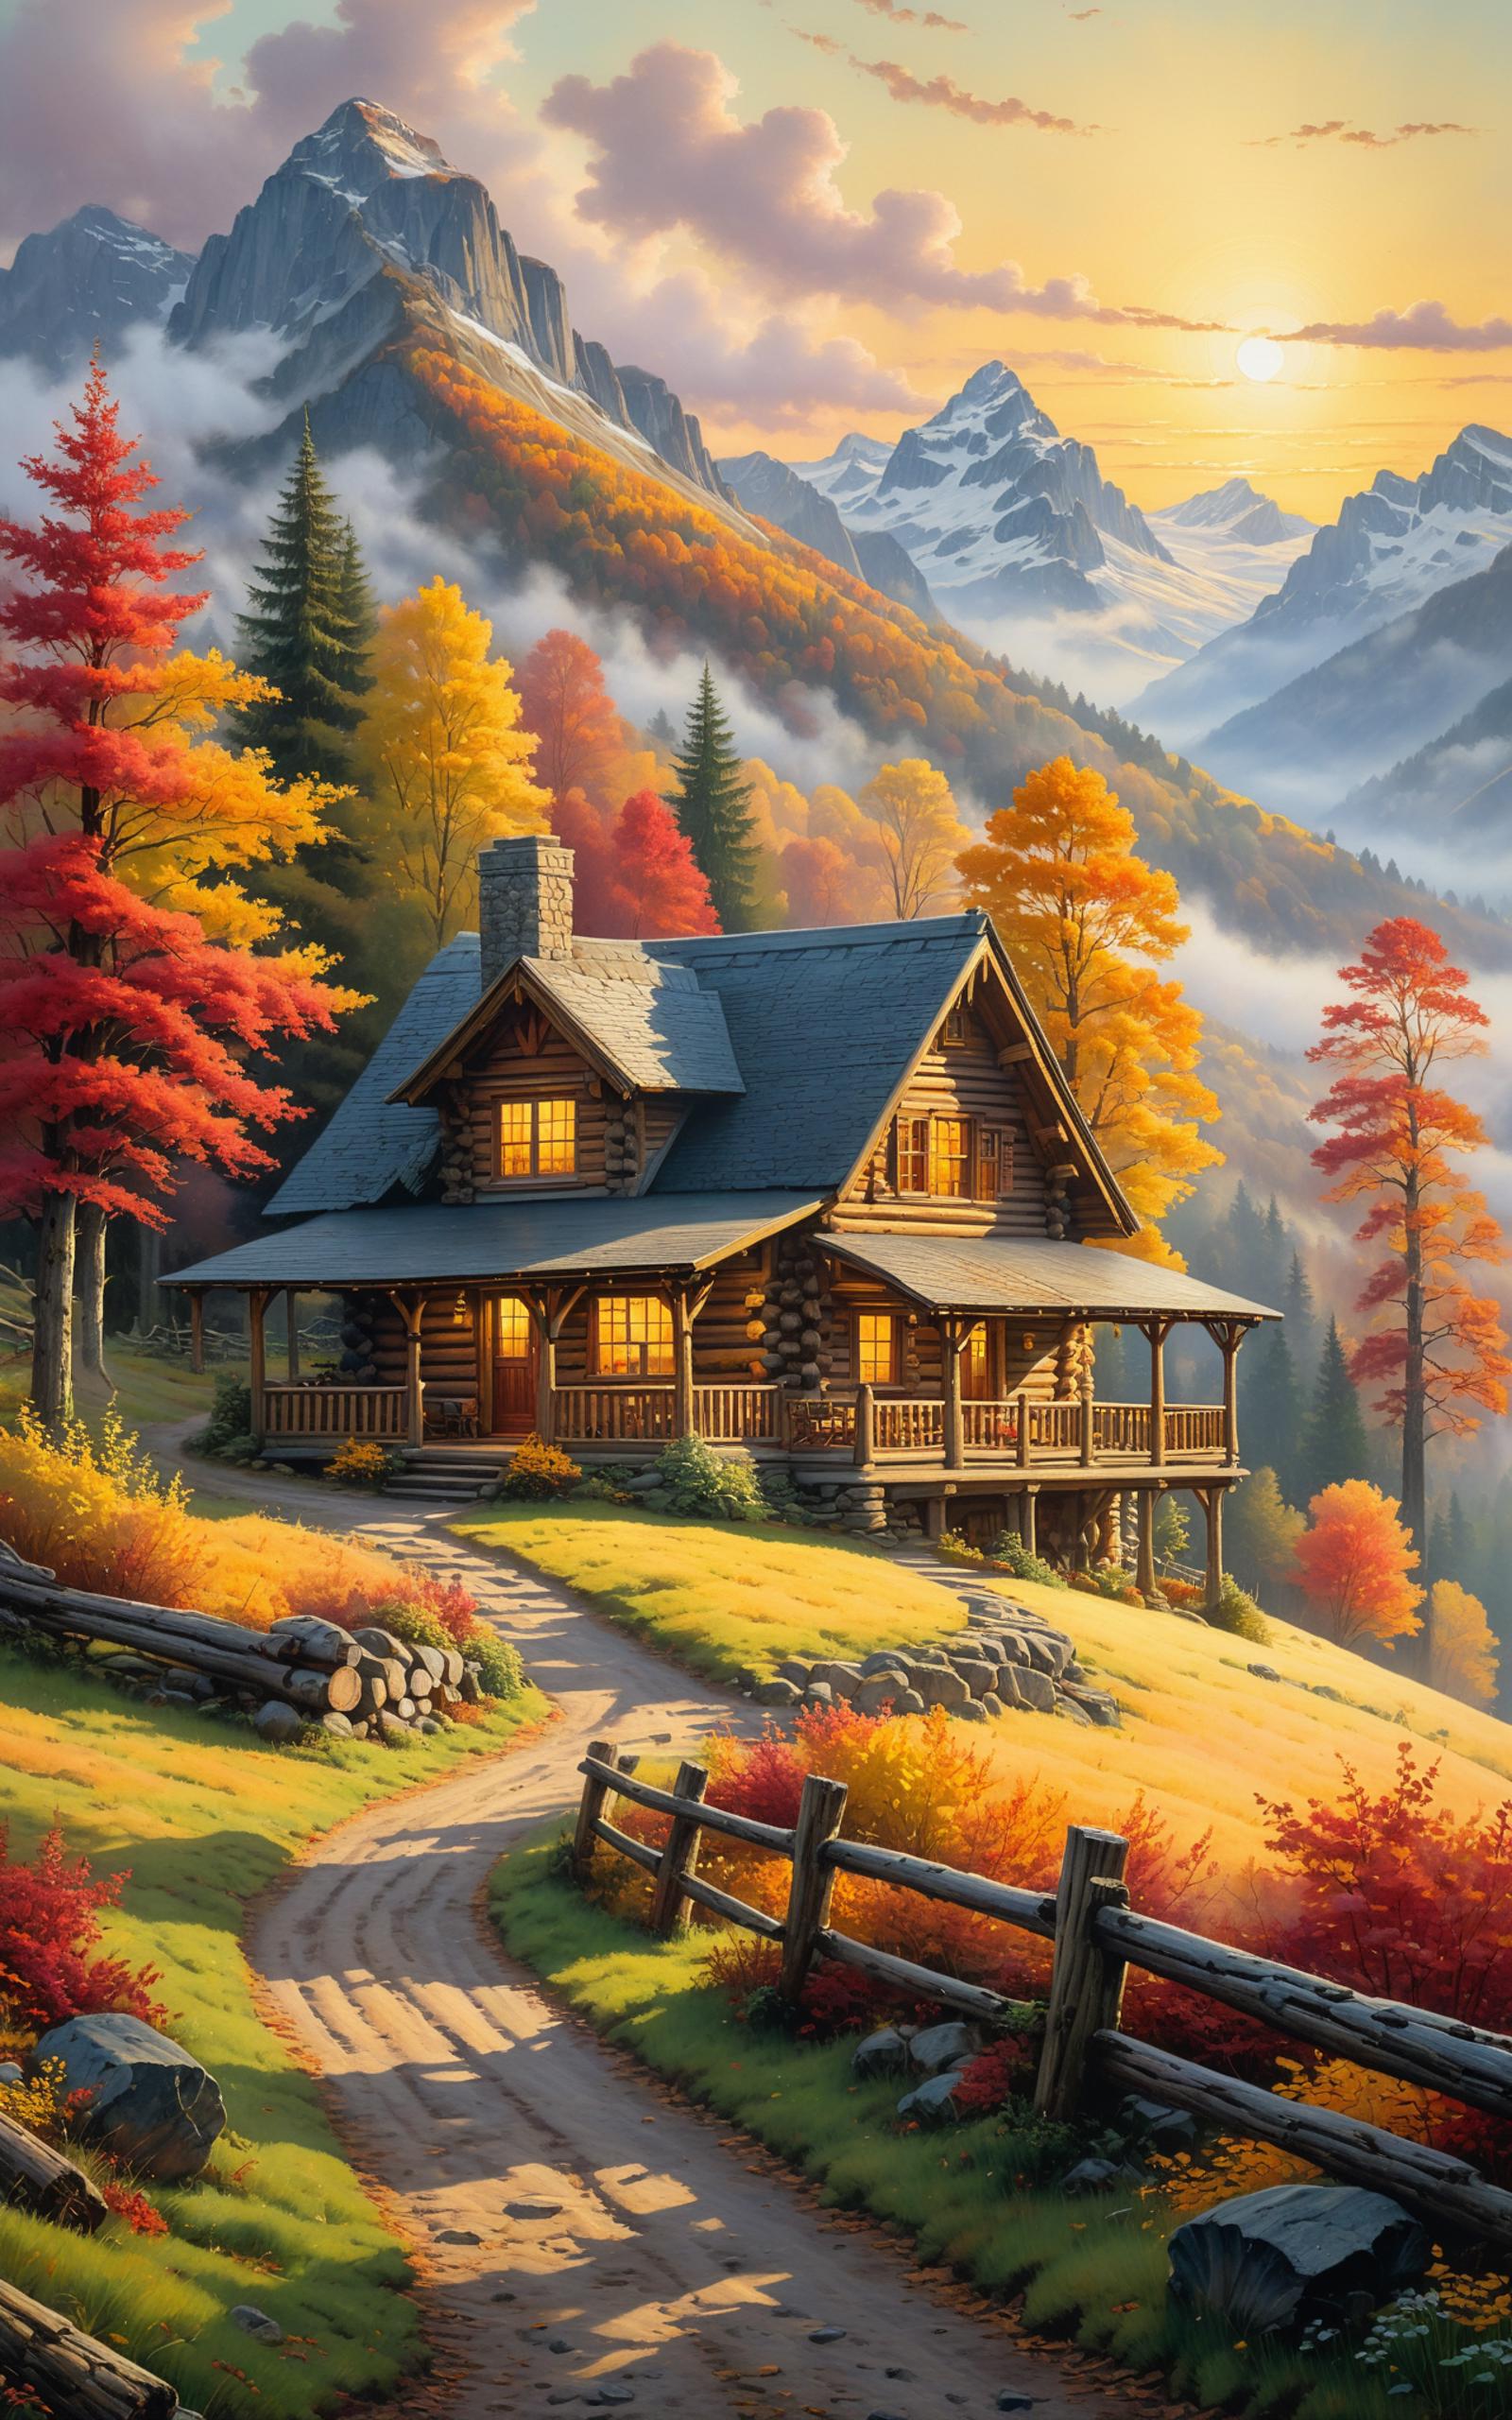 A charming log cabin with a red roof and porch, surrounded by trees and a fence.